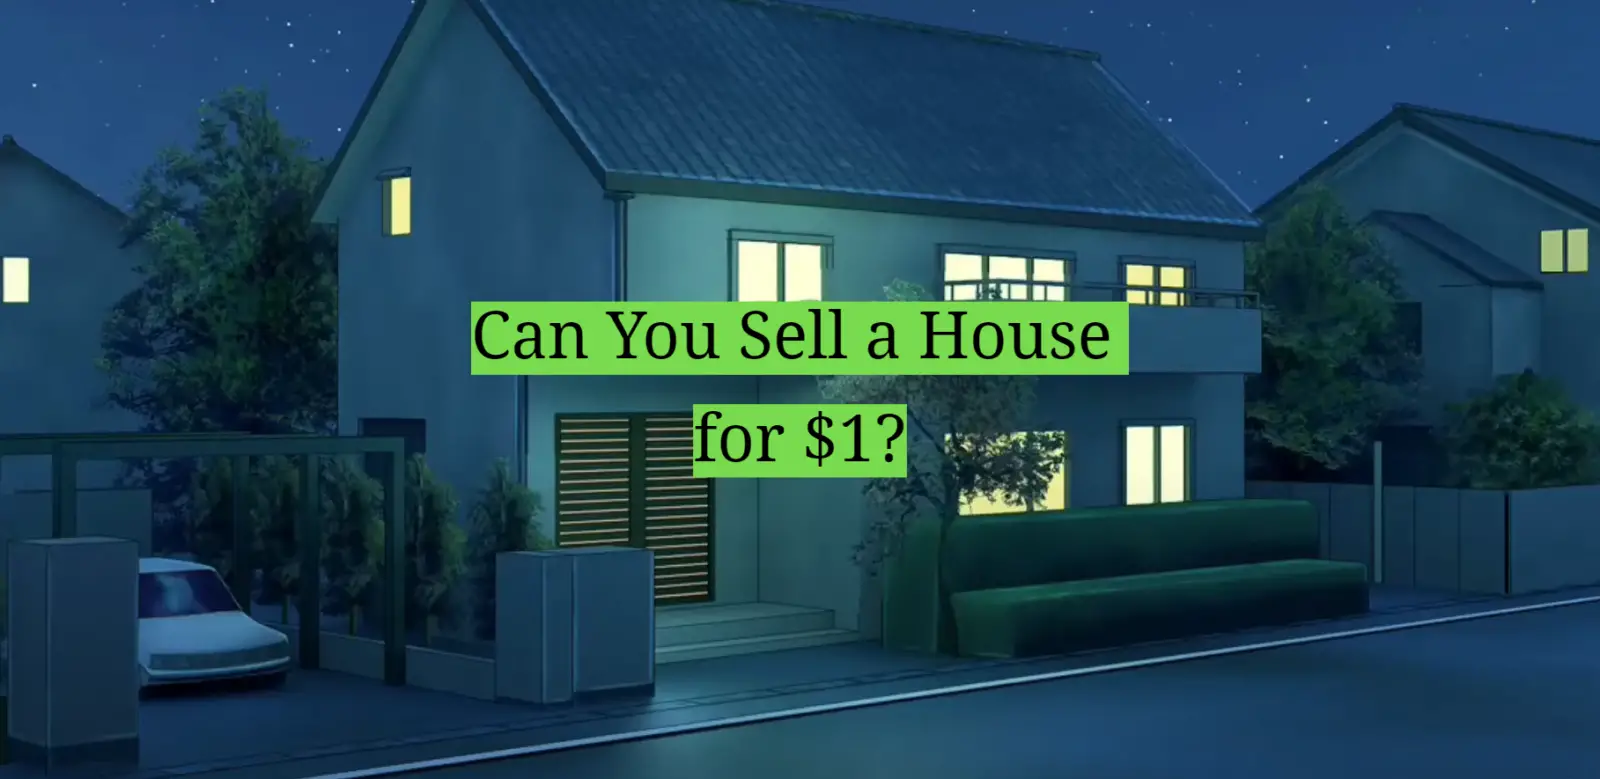 Can You Sell a House for $1?